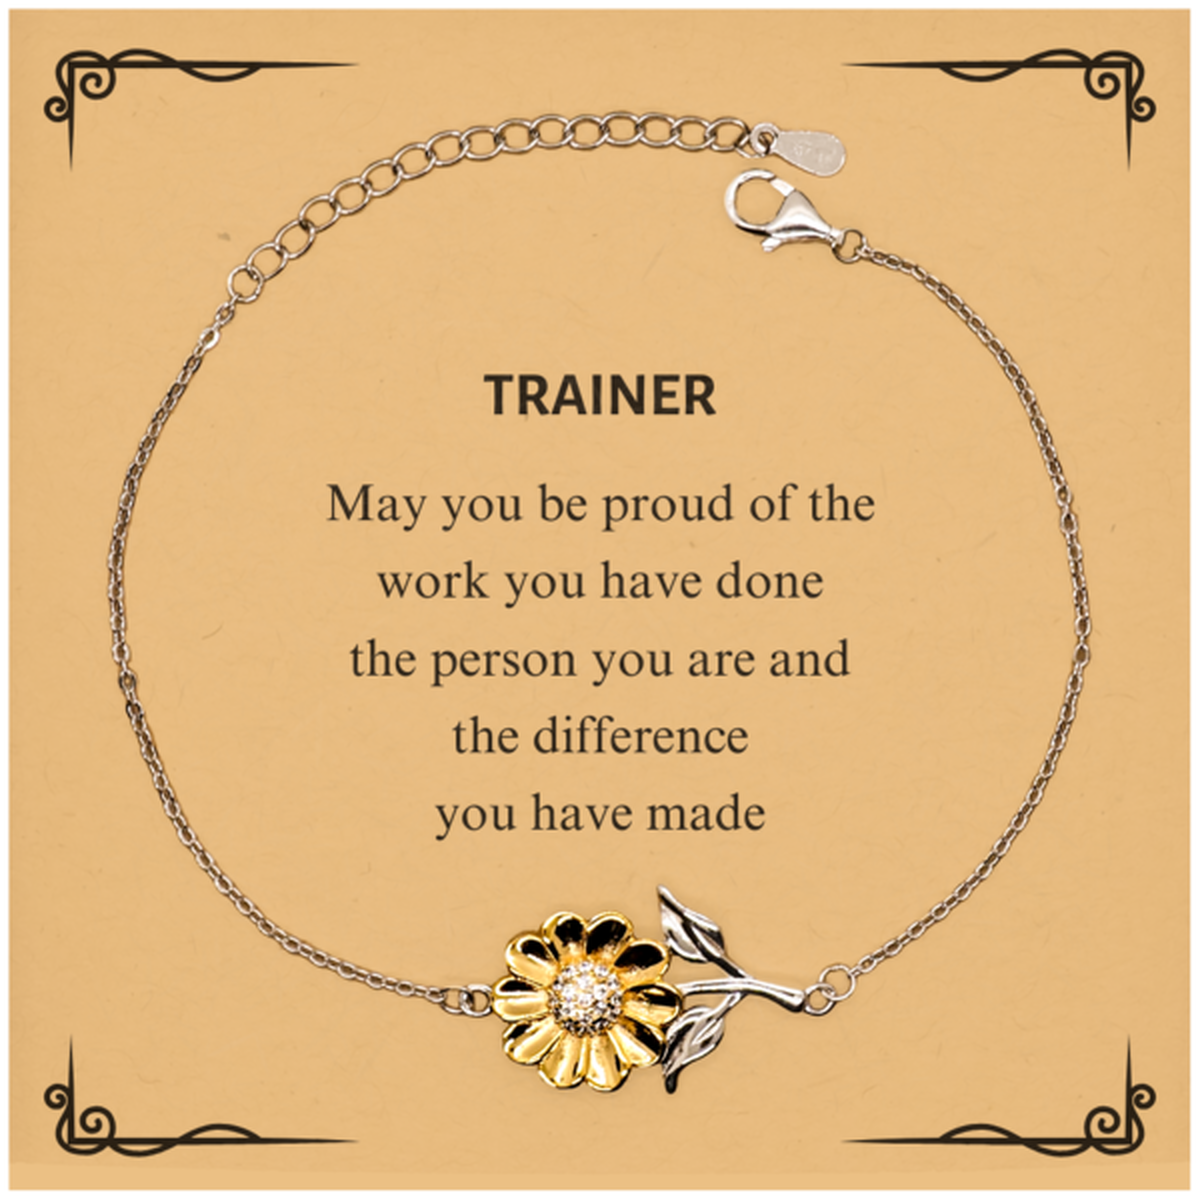 Trainer May you be proud of the work you have done, Retirement Trainer Sunflower Bracelet for Colleague Appreciation Gifts Amazing for Trainer